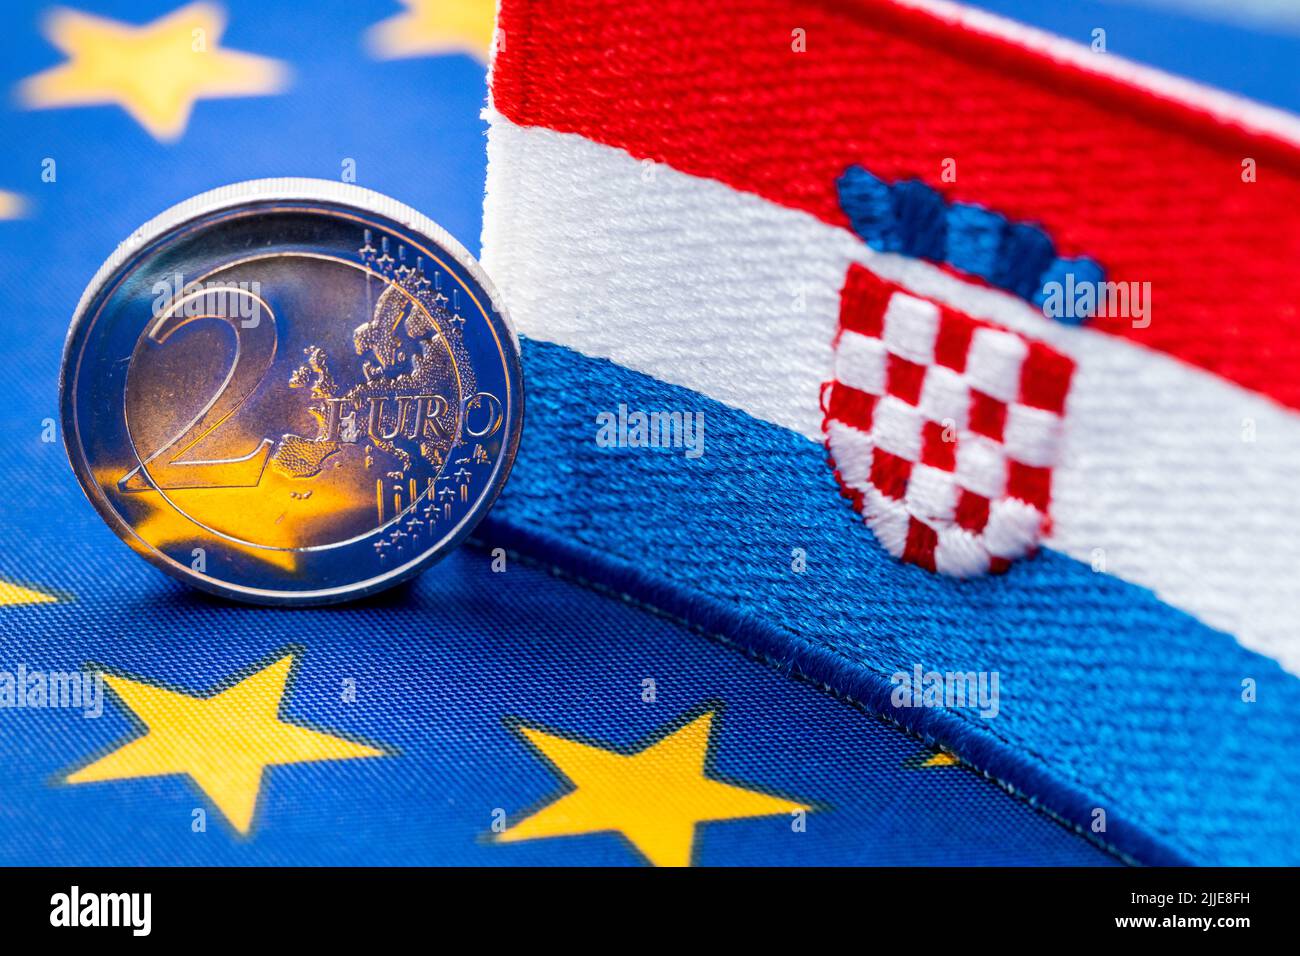 The flag of Croatia against the background of the single currency of the European Union, The concept of Croatia joining the Euro zone,  economic and p Stock Photo